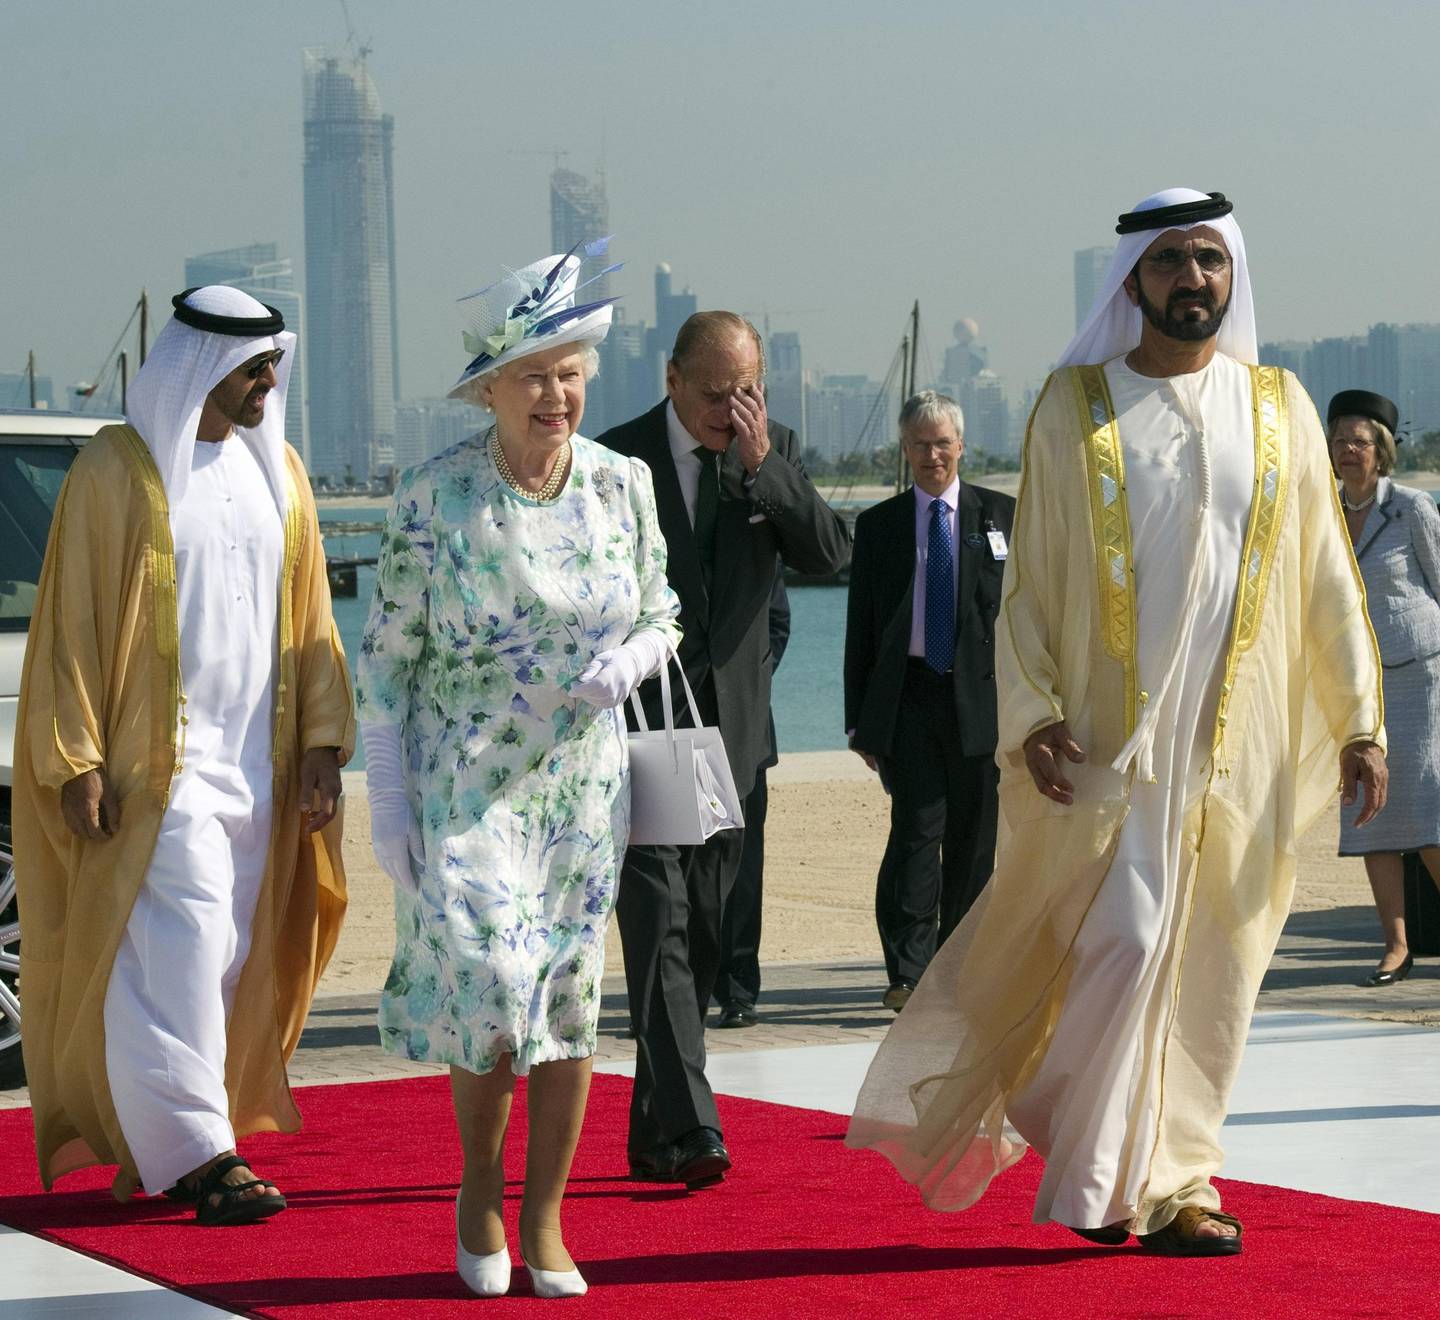 The Queen's death has been mourned in many nations in the Middle East, including the UAE. AP